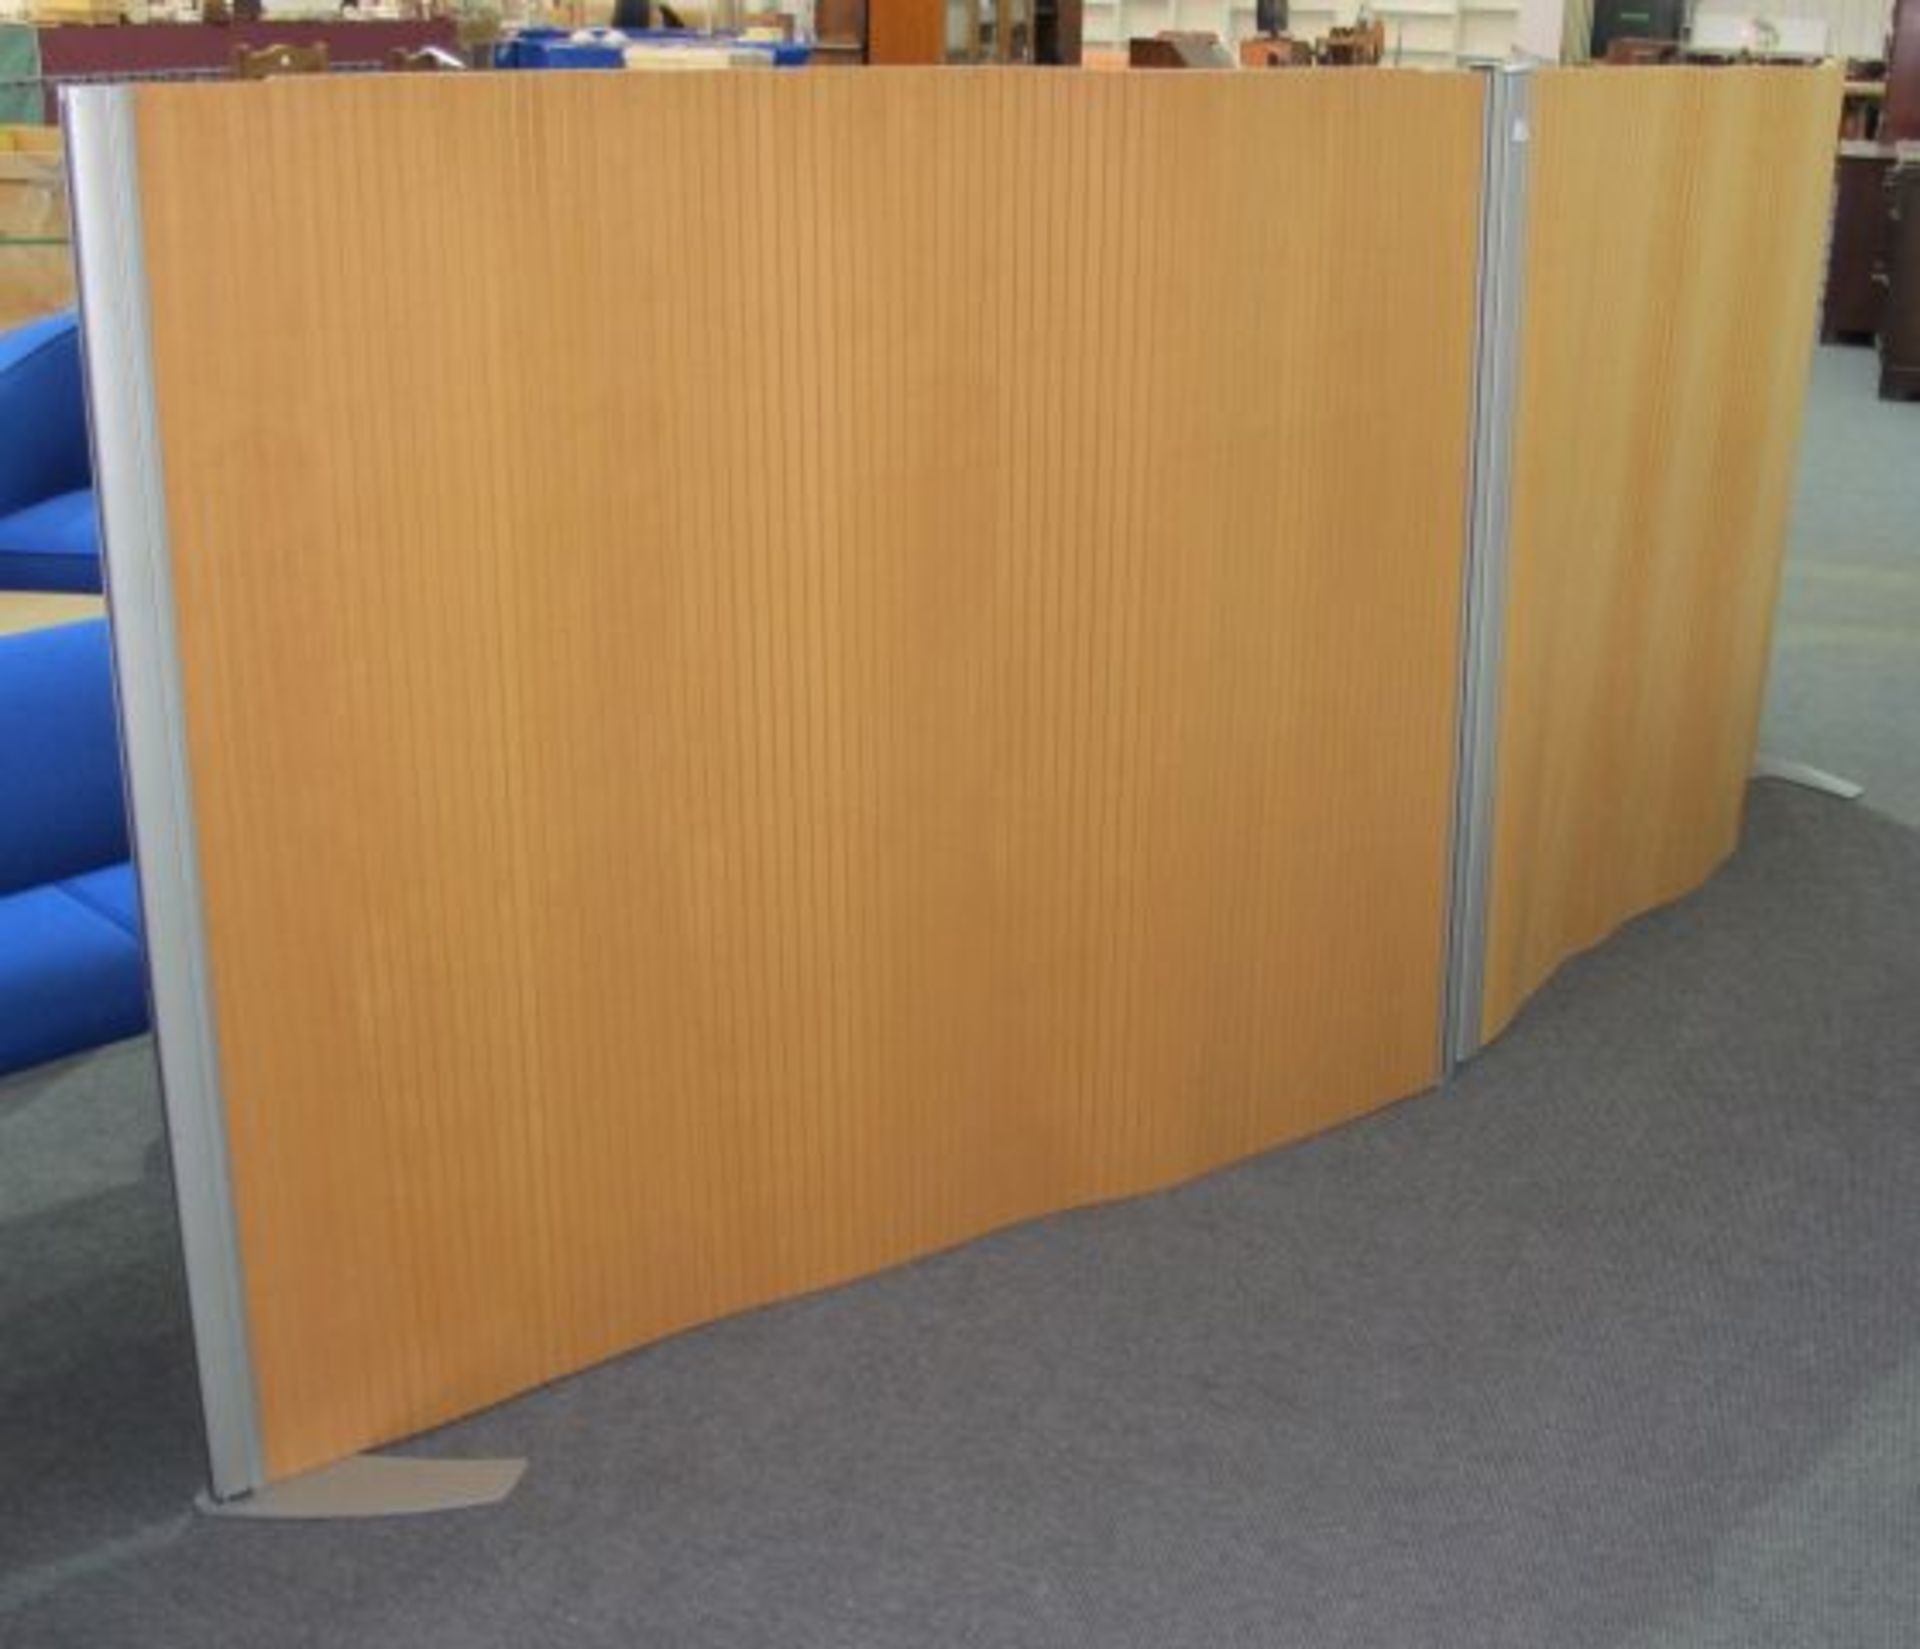 * A light coloured 'Tambour' Style Flexible Partition. Each partition is 156cm long and stands 120cm